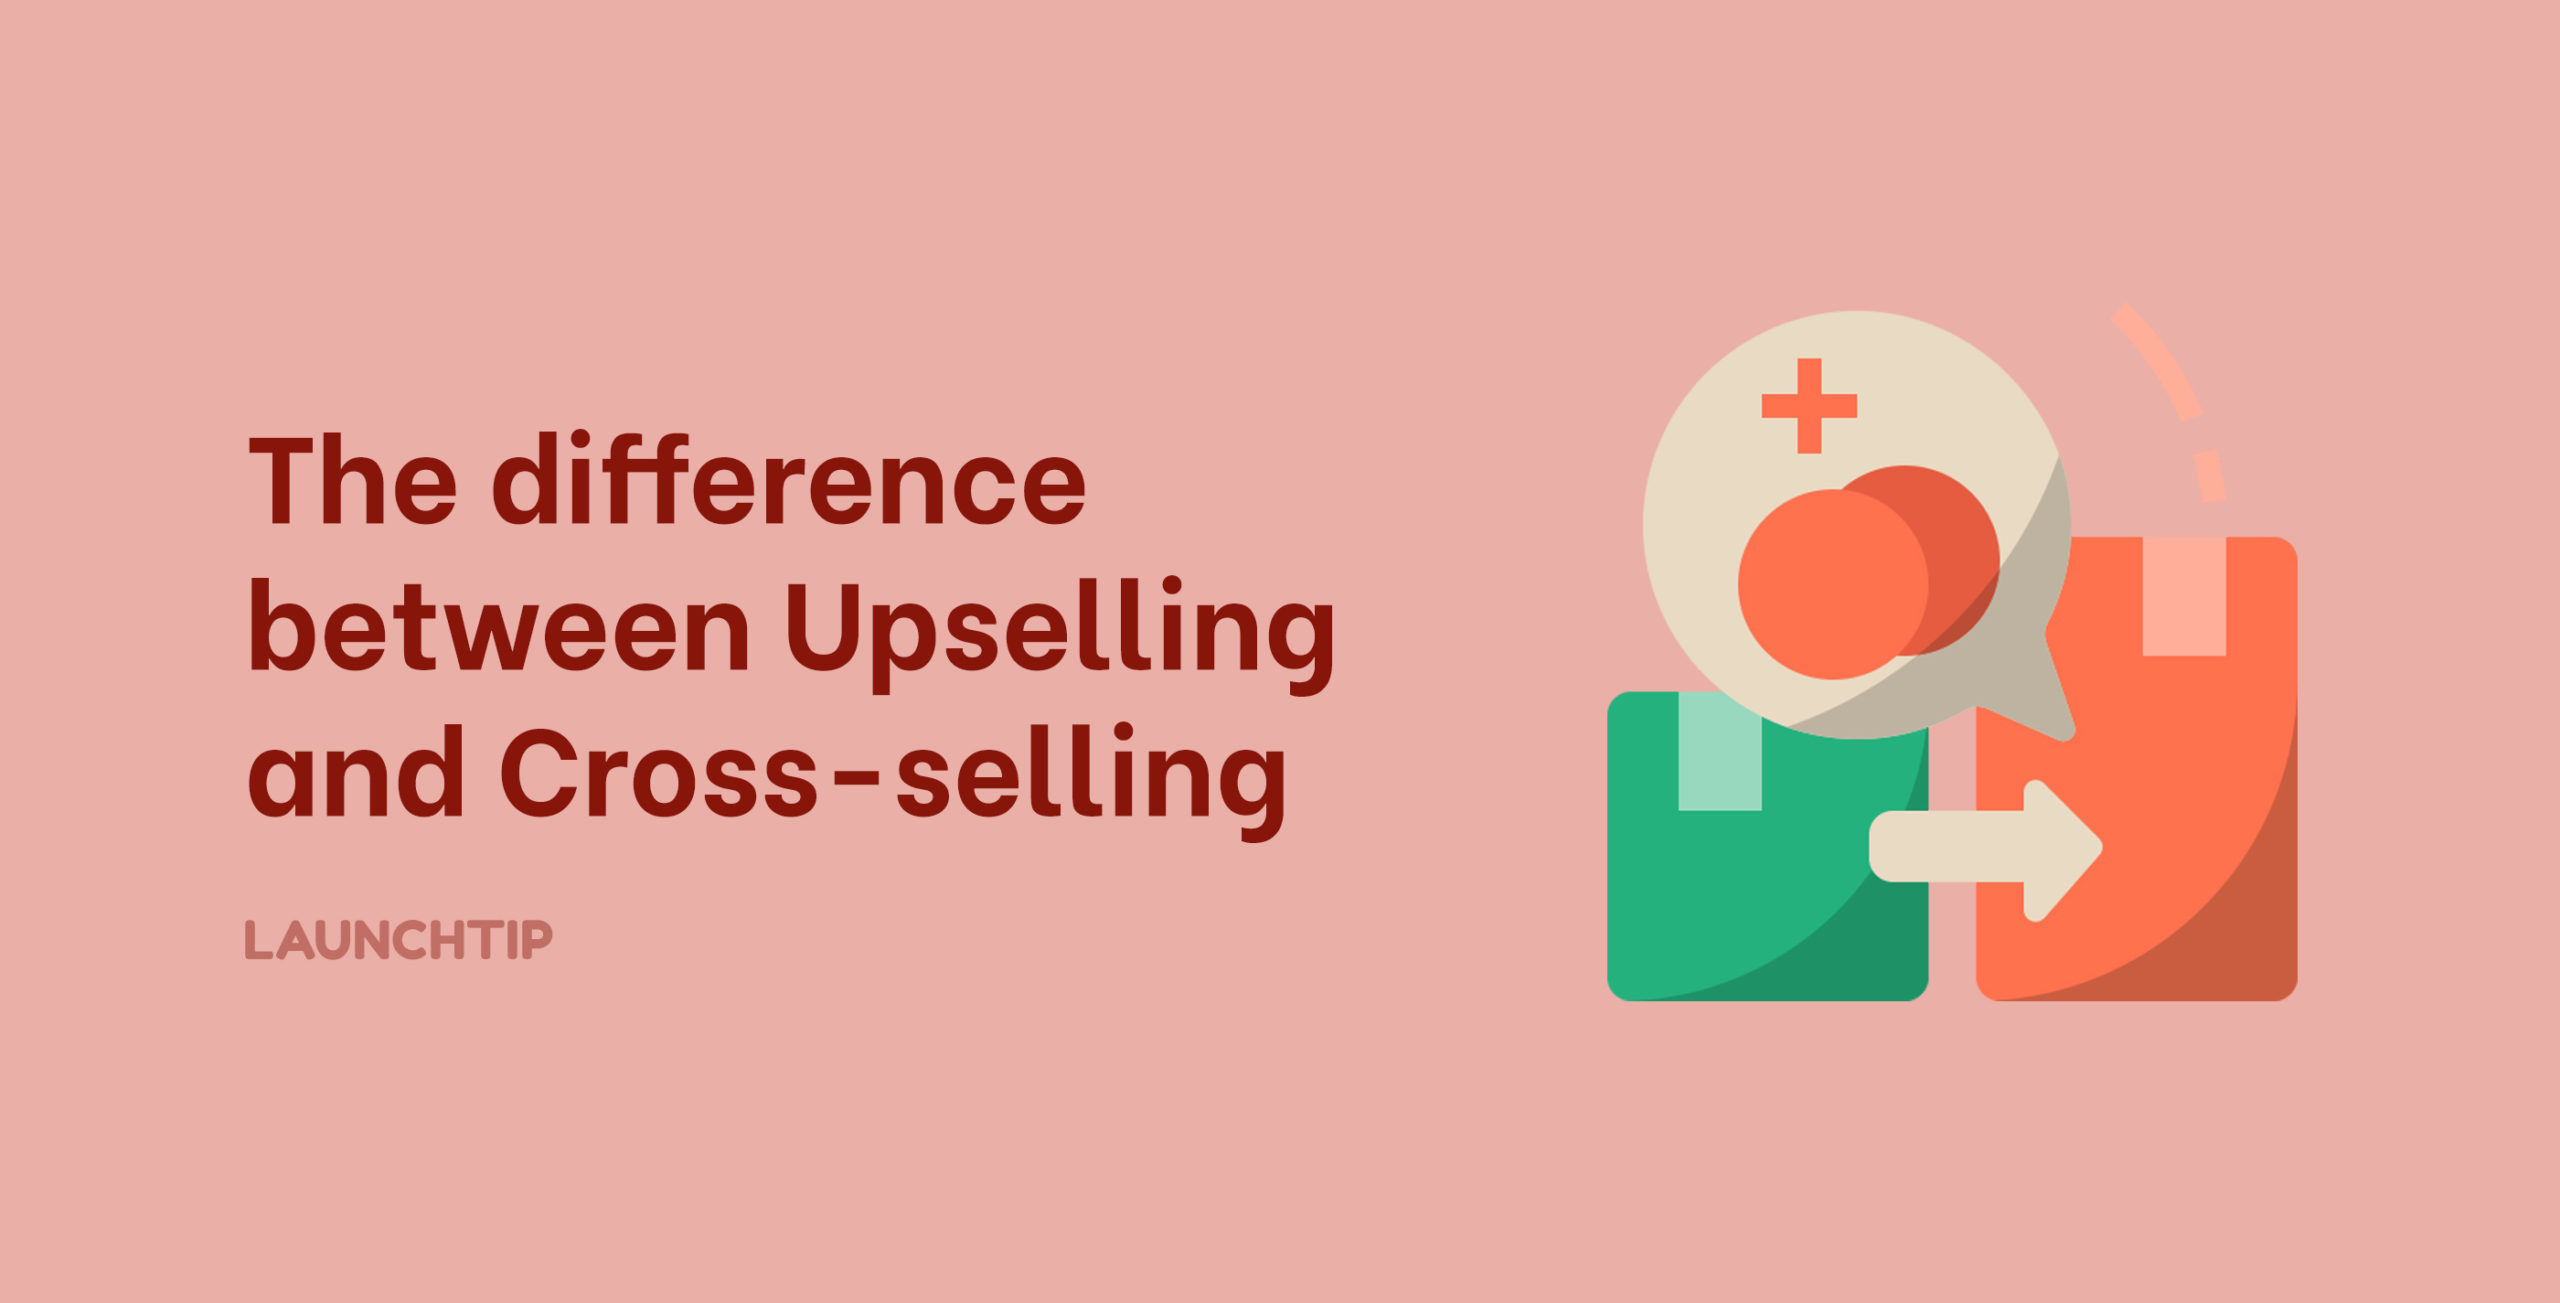 Upselling and cross-selling